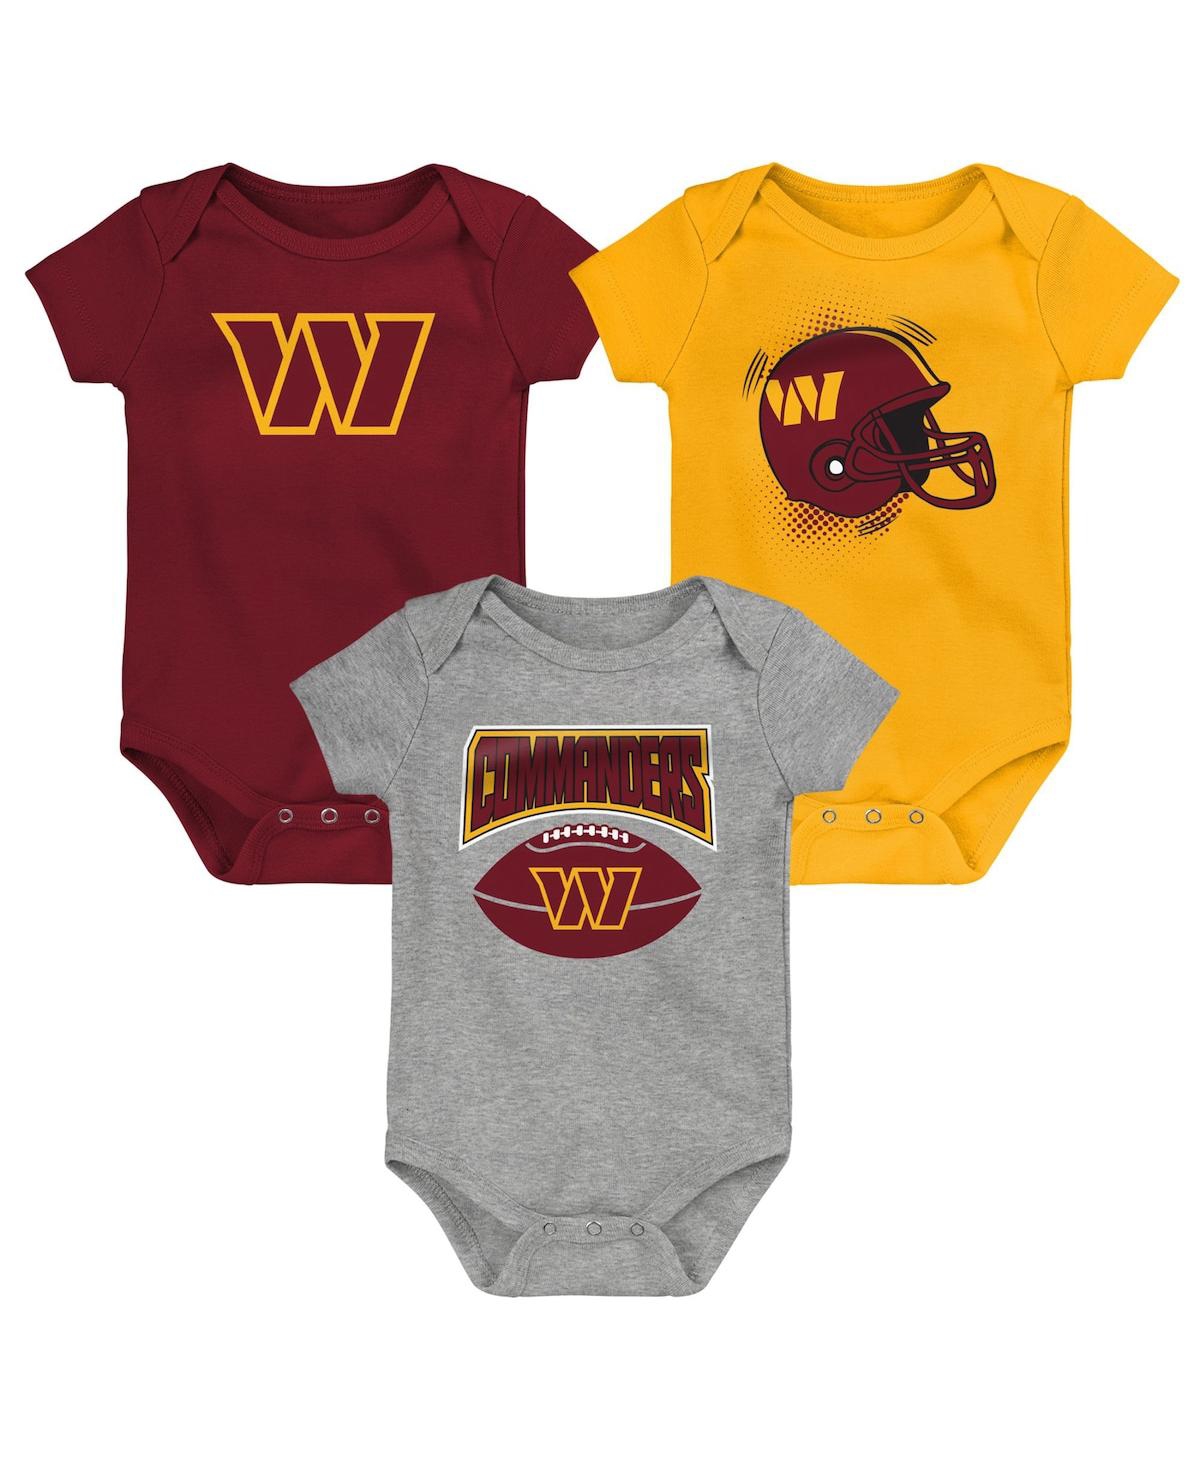 Outerstuff Babies' Infant Boys And Girls Burgundy, Gold, Heathered Gray Washington Commanders 3-pack Game On Bodysuit S In Burgundy,gold